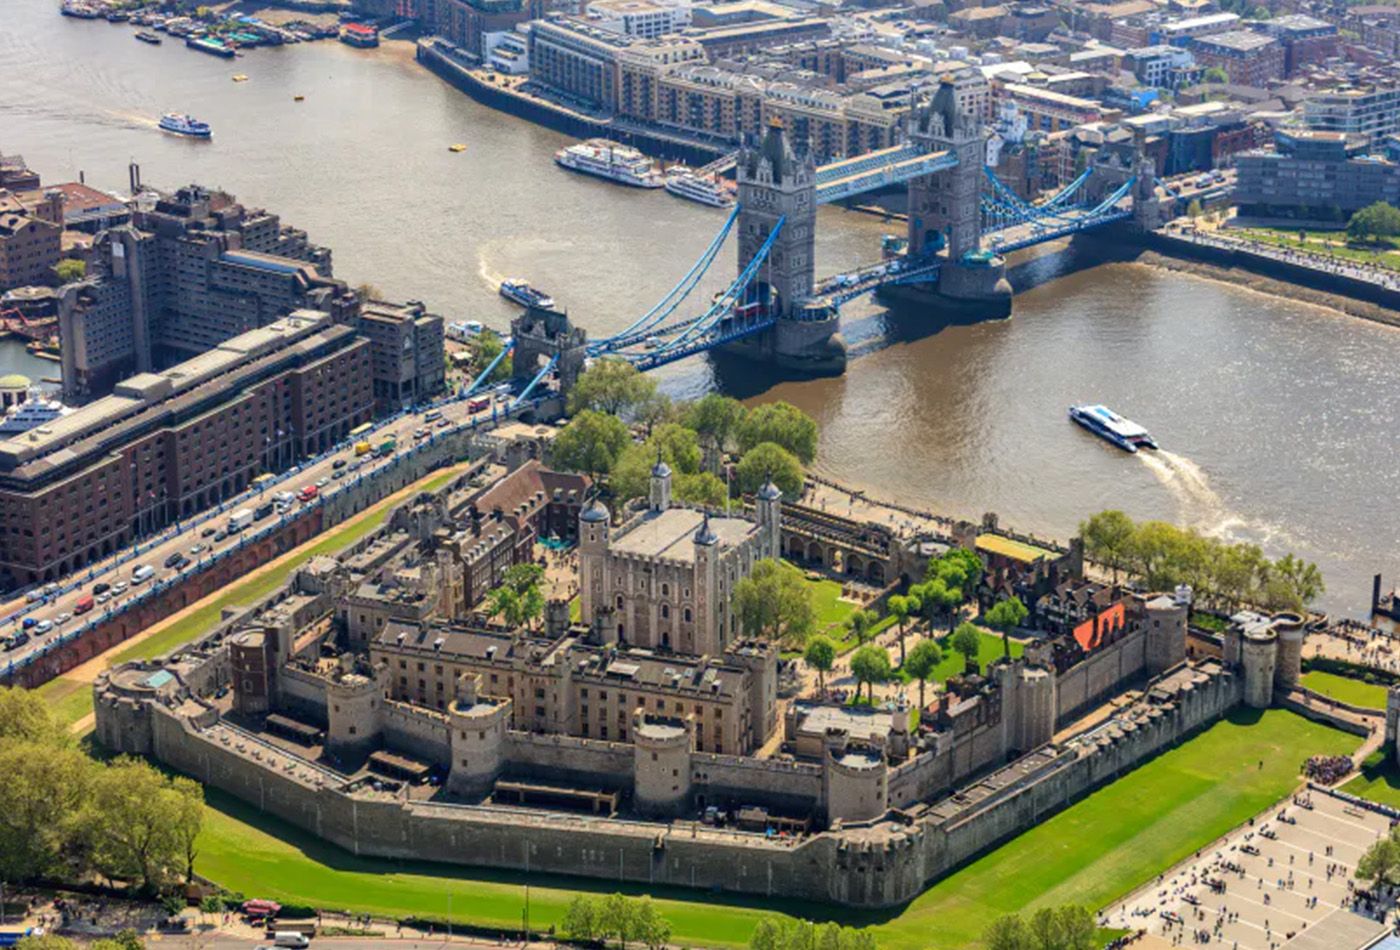 Birdseye view of tower of london with london bridge in the background